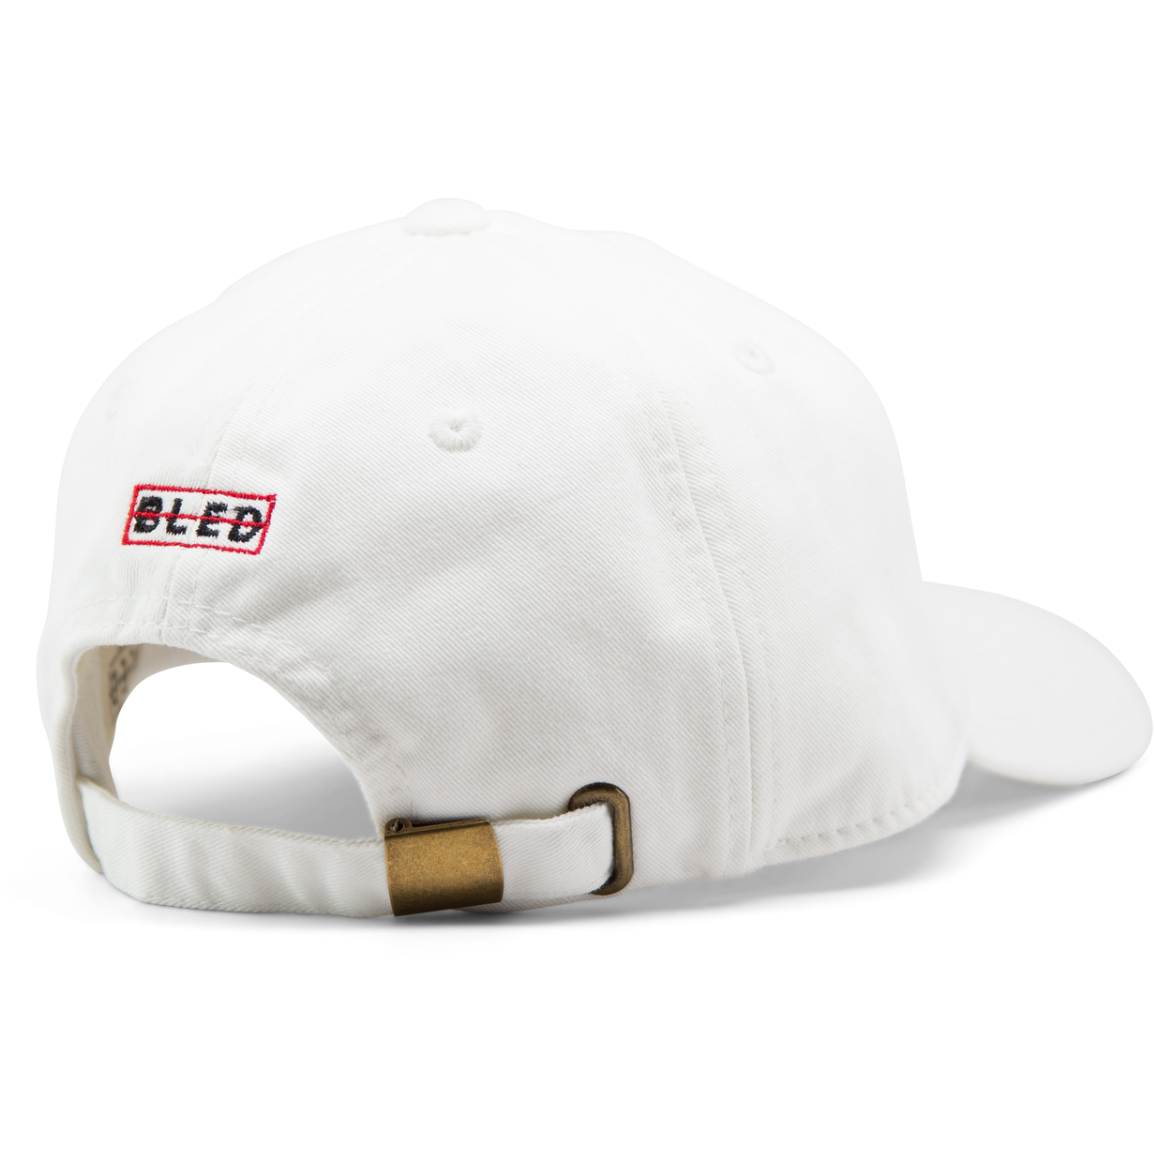 6-panel unconstructed 100% Cotton white dad hat featuring Levels design embroidery on the front and Bled logo embroidered on the back with adjustable strap closure.